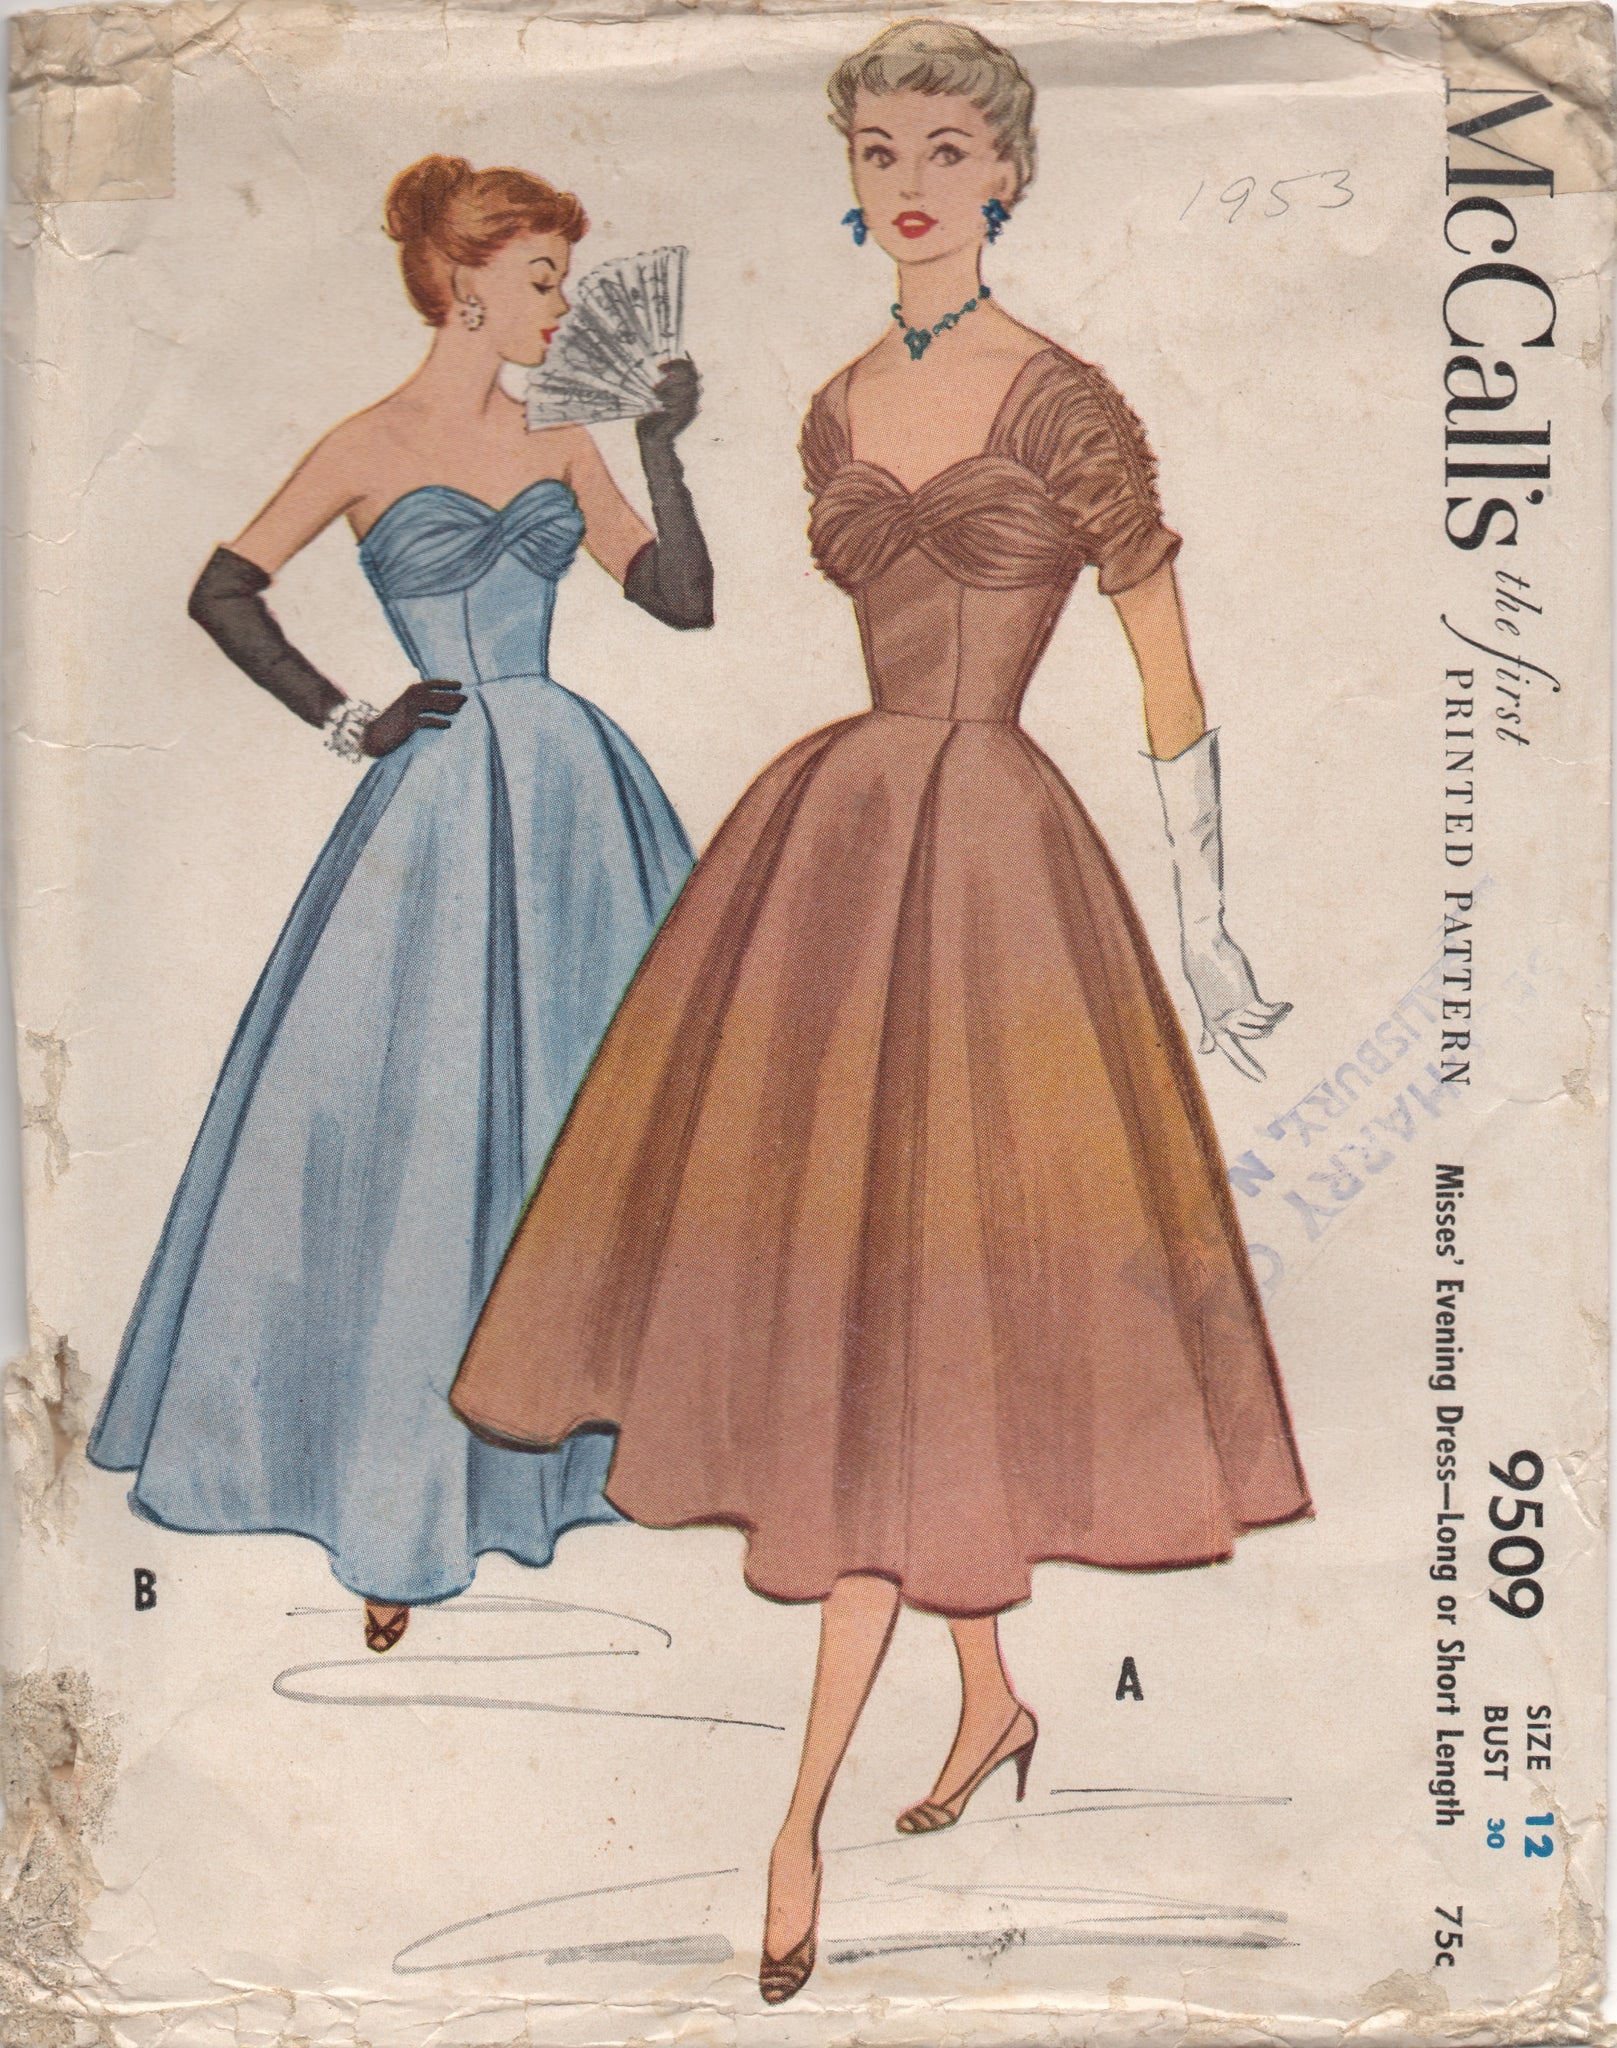 pattern search for 50s ball gown/prom dress : r/sewing